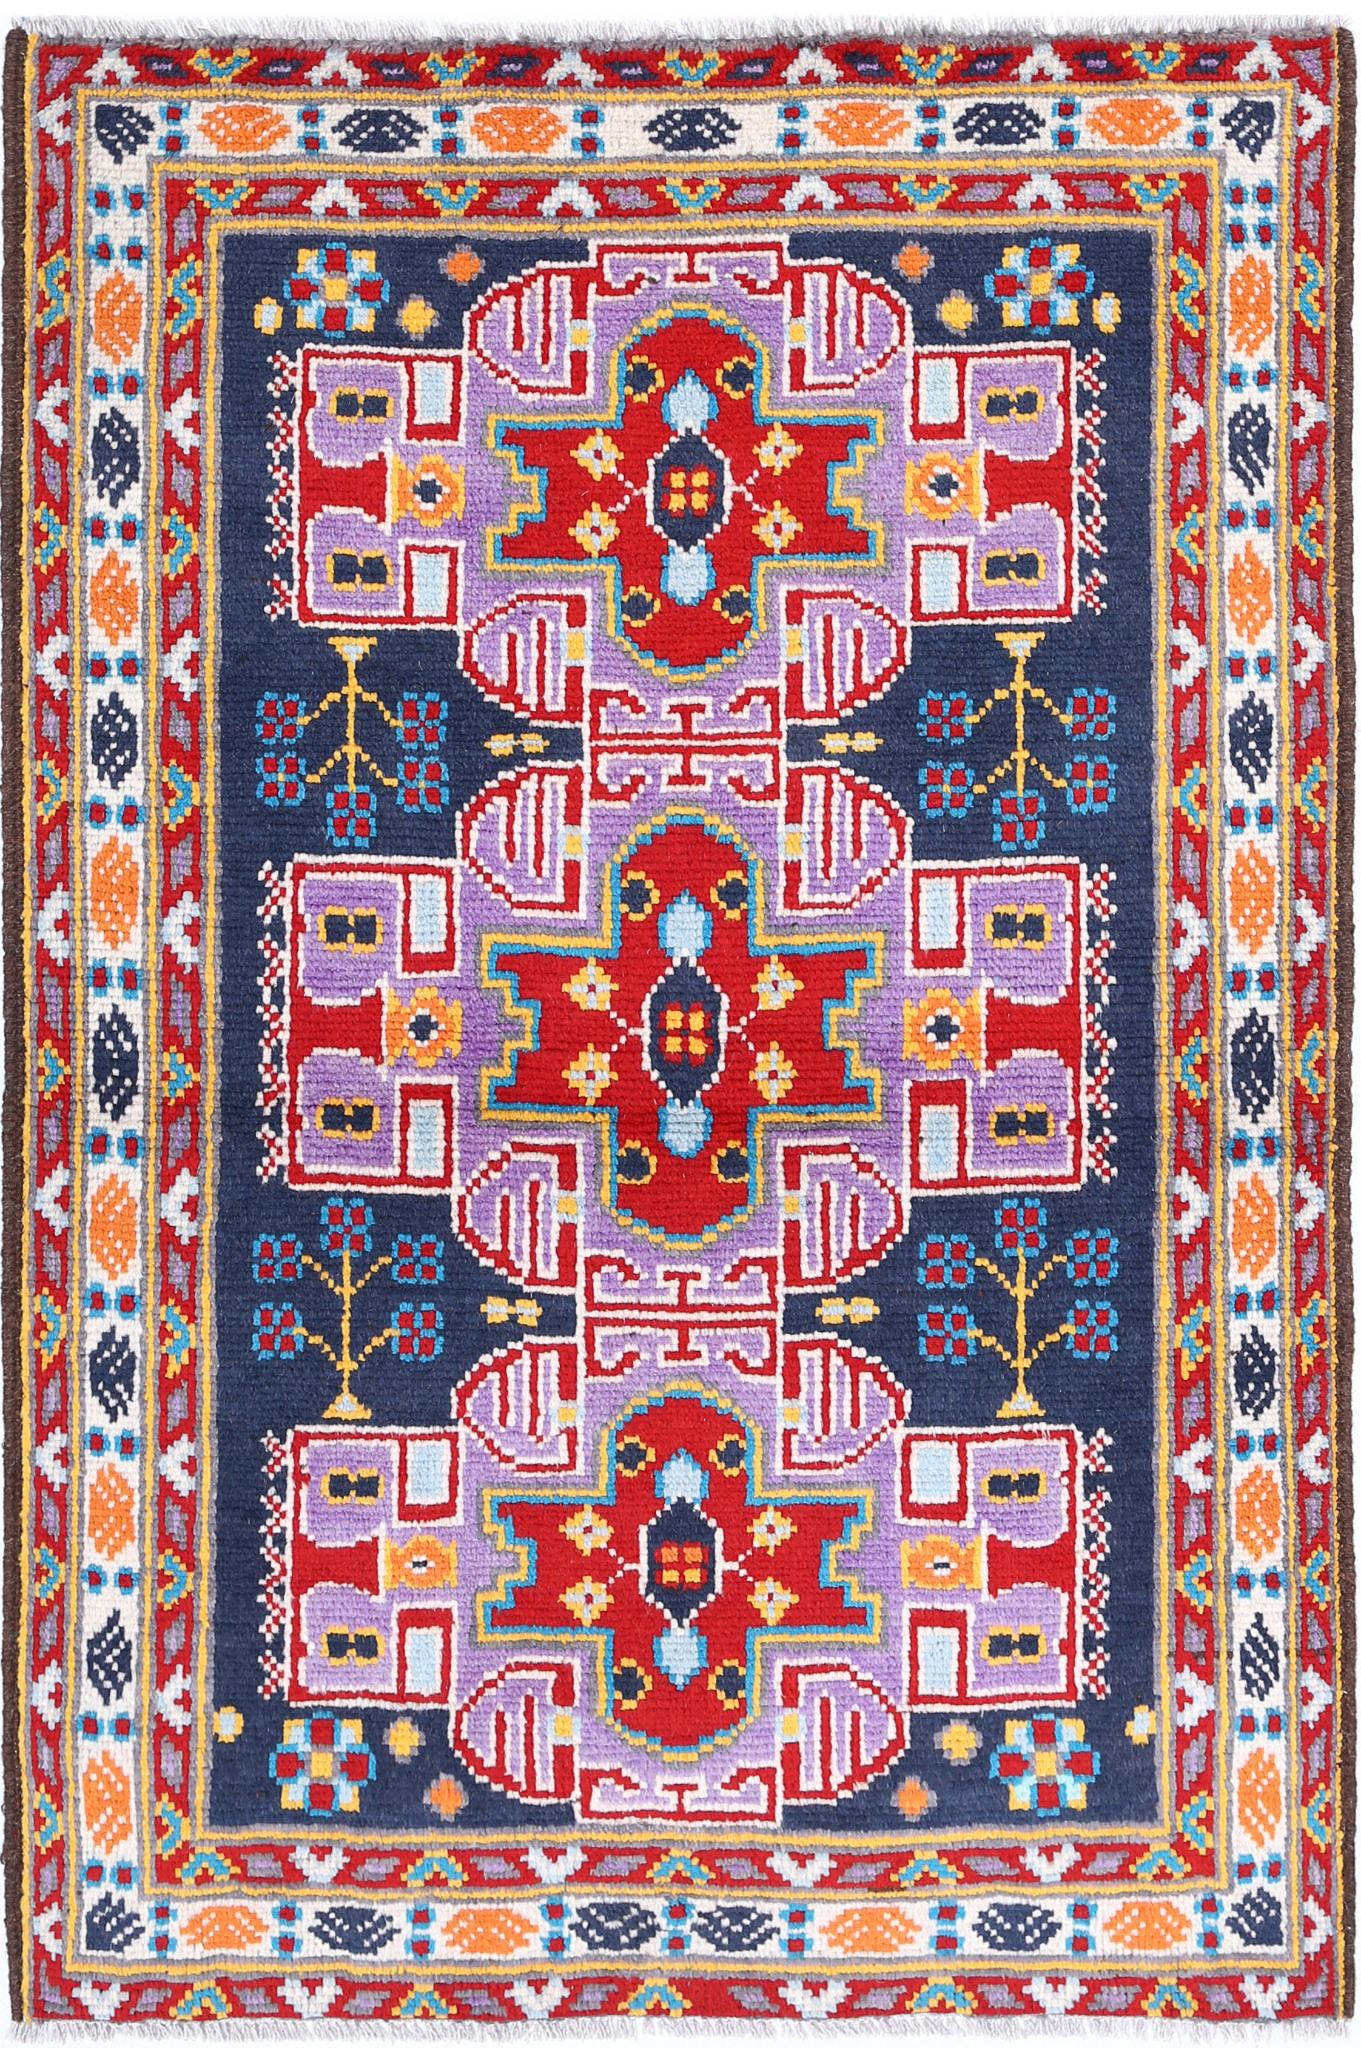 Revival-hand-knotted-qarghani-wool-rug-5014064.jpg